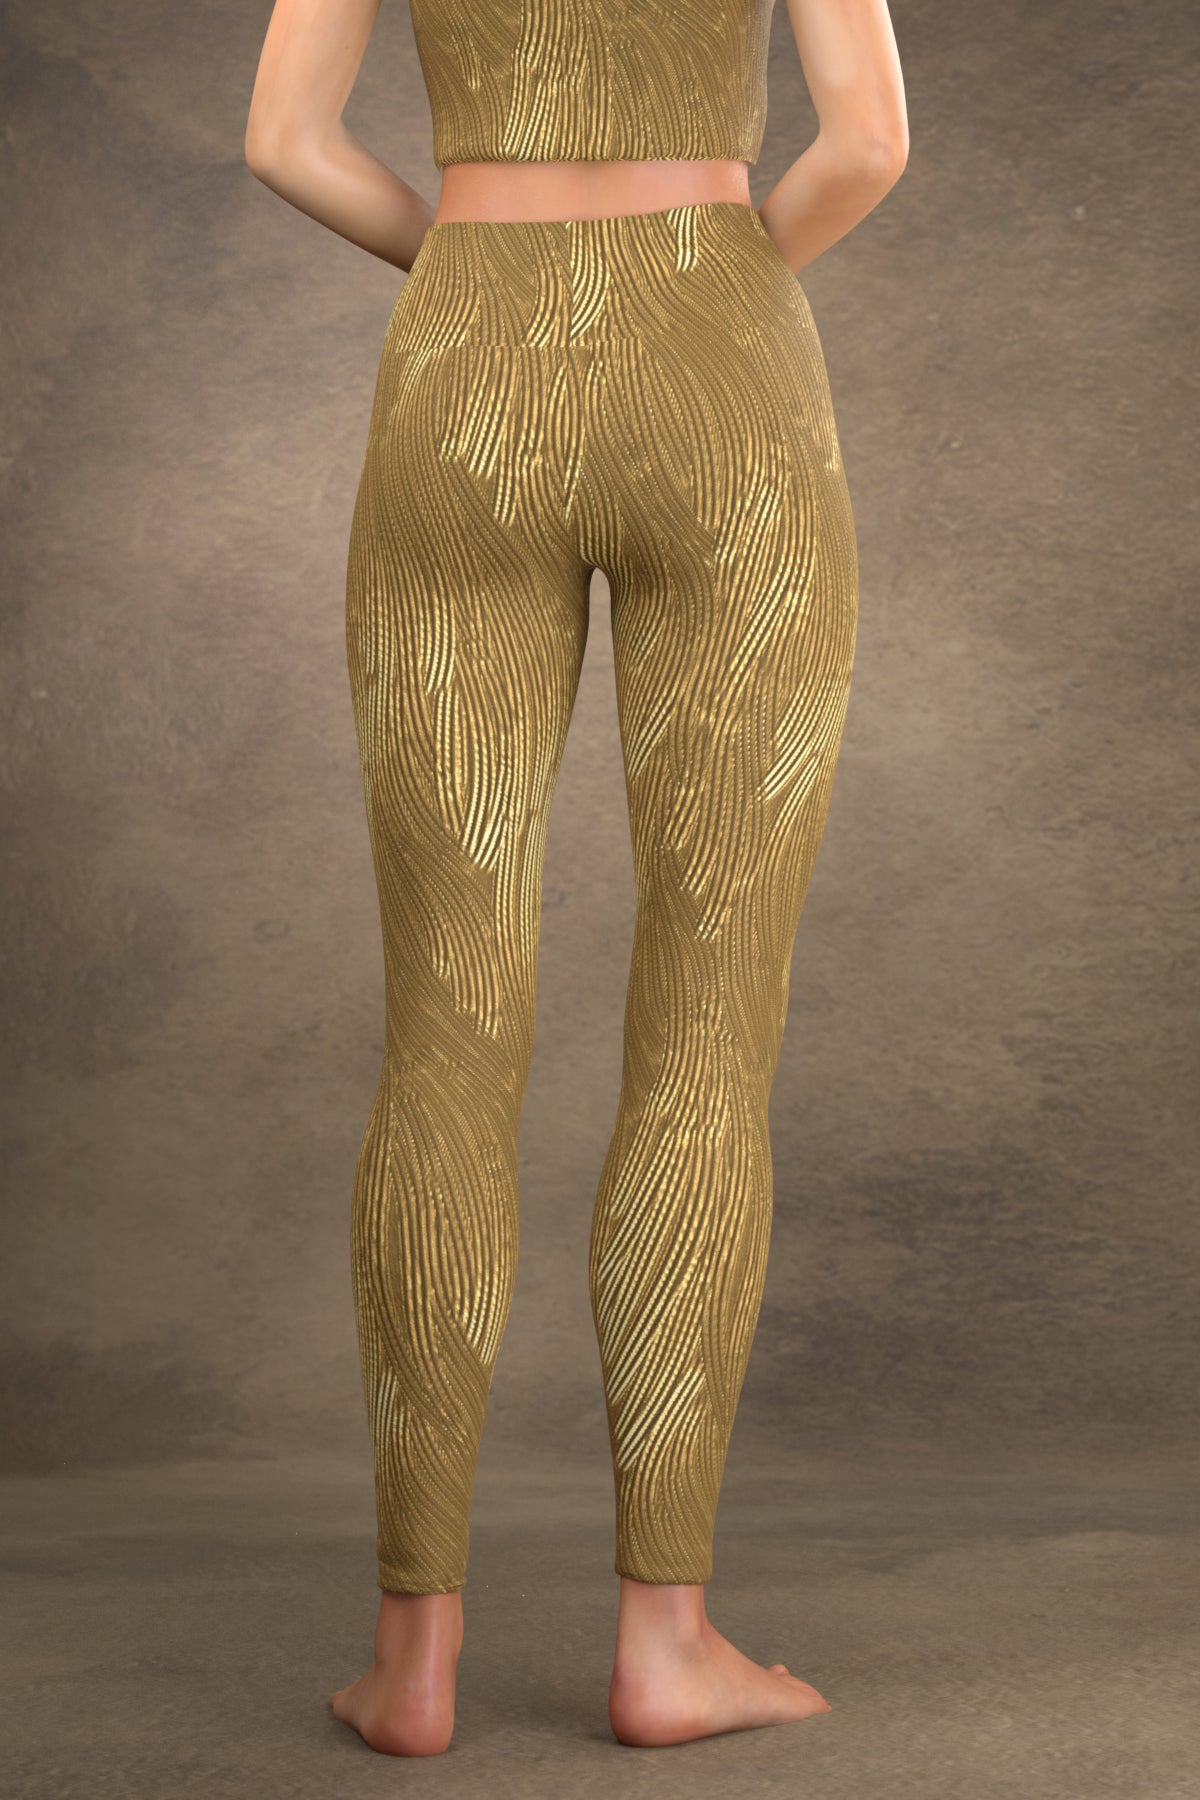 Gold Butterfly Leggings Glow in the Dark and Gold Design Yoga Wear